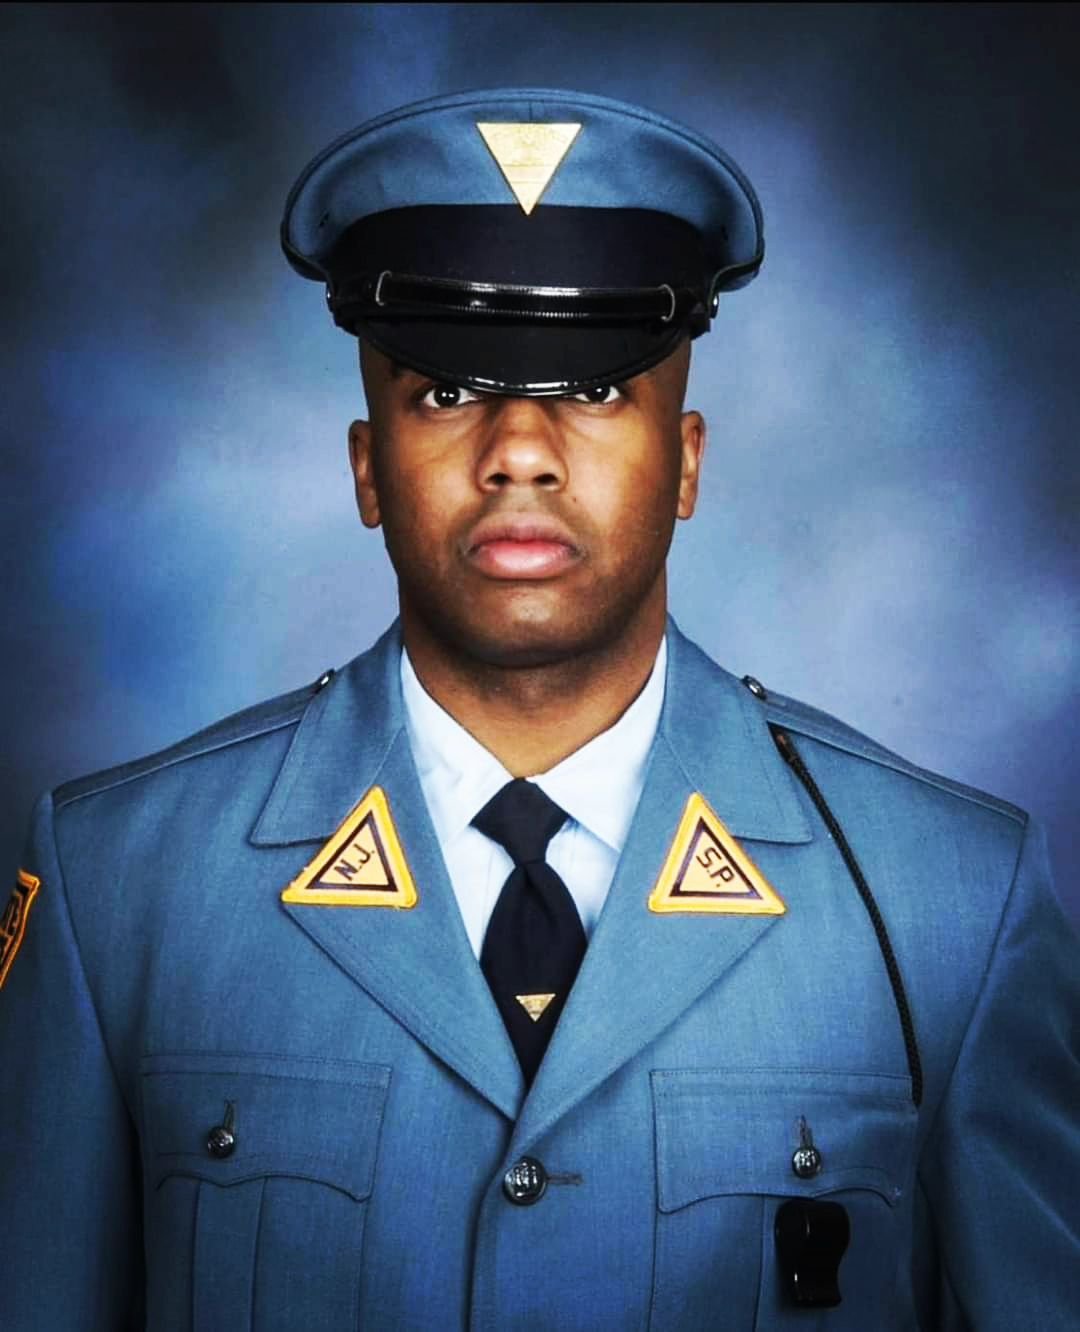 New Jersey State Police Colonel Patrick J. Callahan sadly announced the tragic passing of Trooper Marcellus E. Bethea, Badge #7829, from Troop &ldquo;D&rdquo;, Moorestown Station, in an unfortunate drowning incident during a training exercise.

Troop